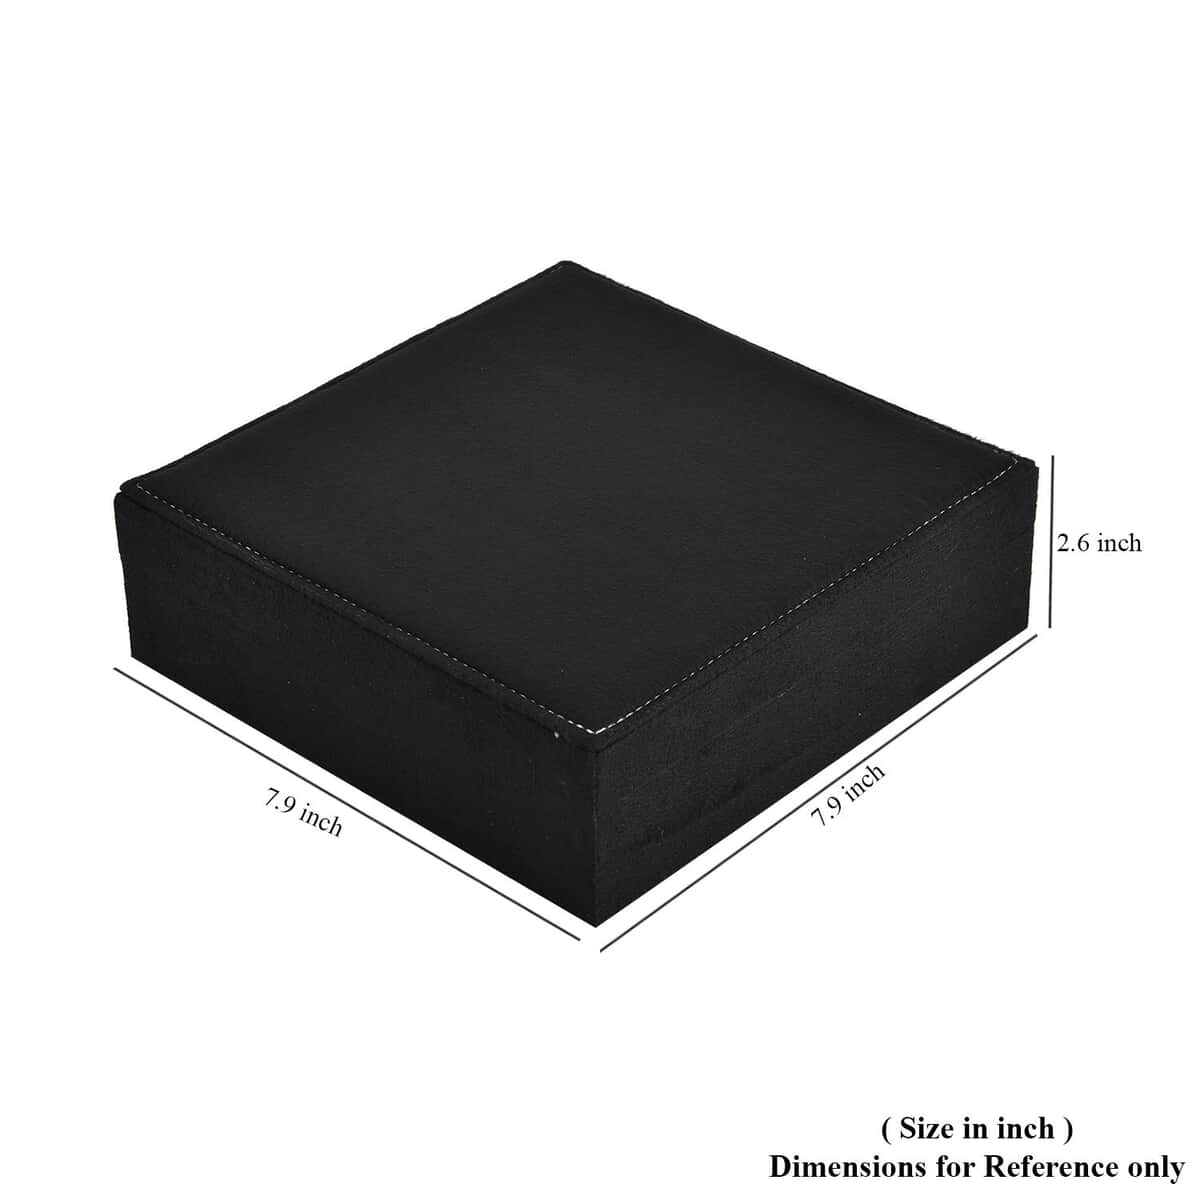 Black Velvet & MDF Jewelry Box with Latch Clasp 7.9"x7.9"x2.6") (11 Ring Slot, 6 Hooks for Necklace, Pocket) image number 7